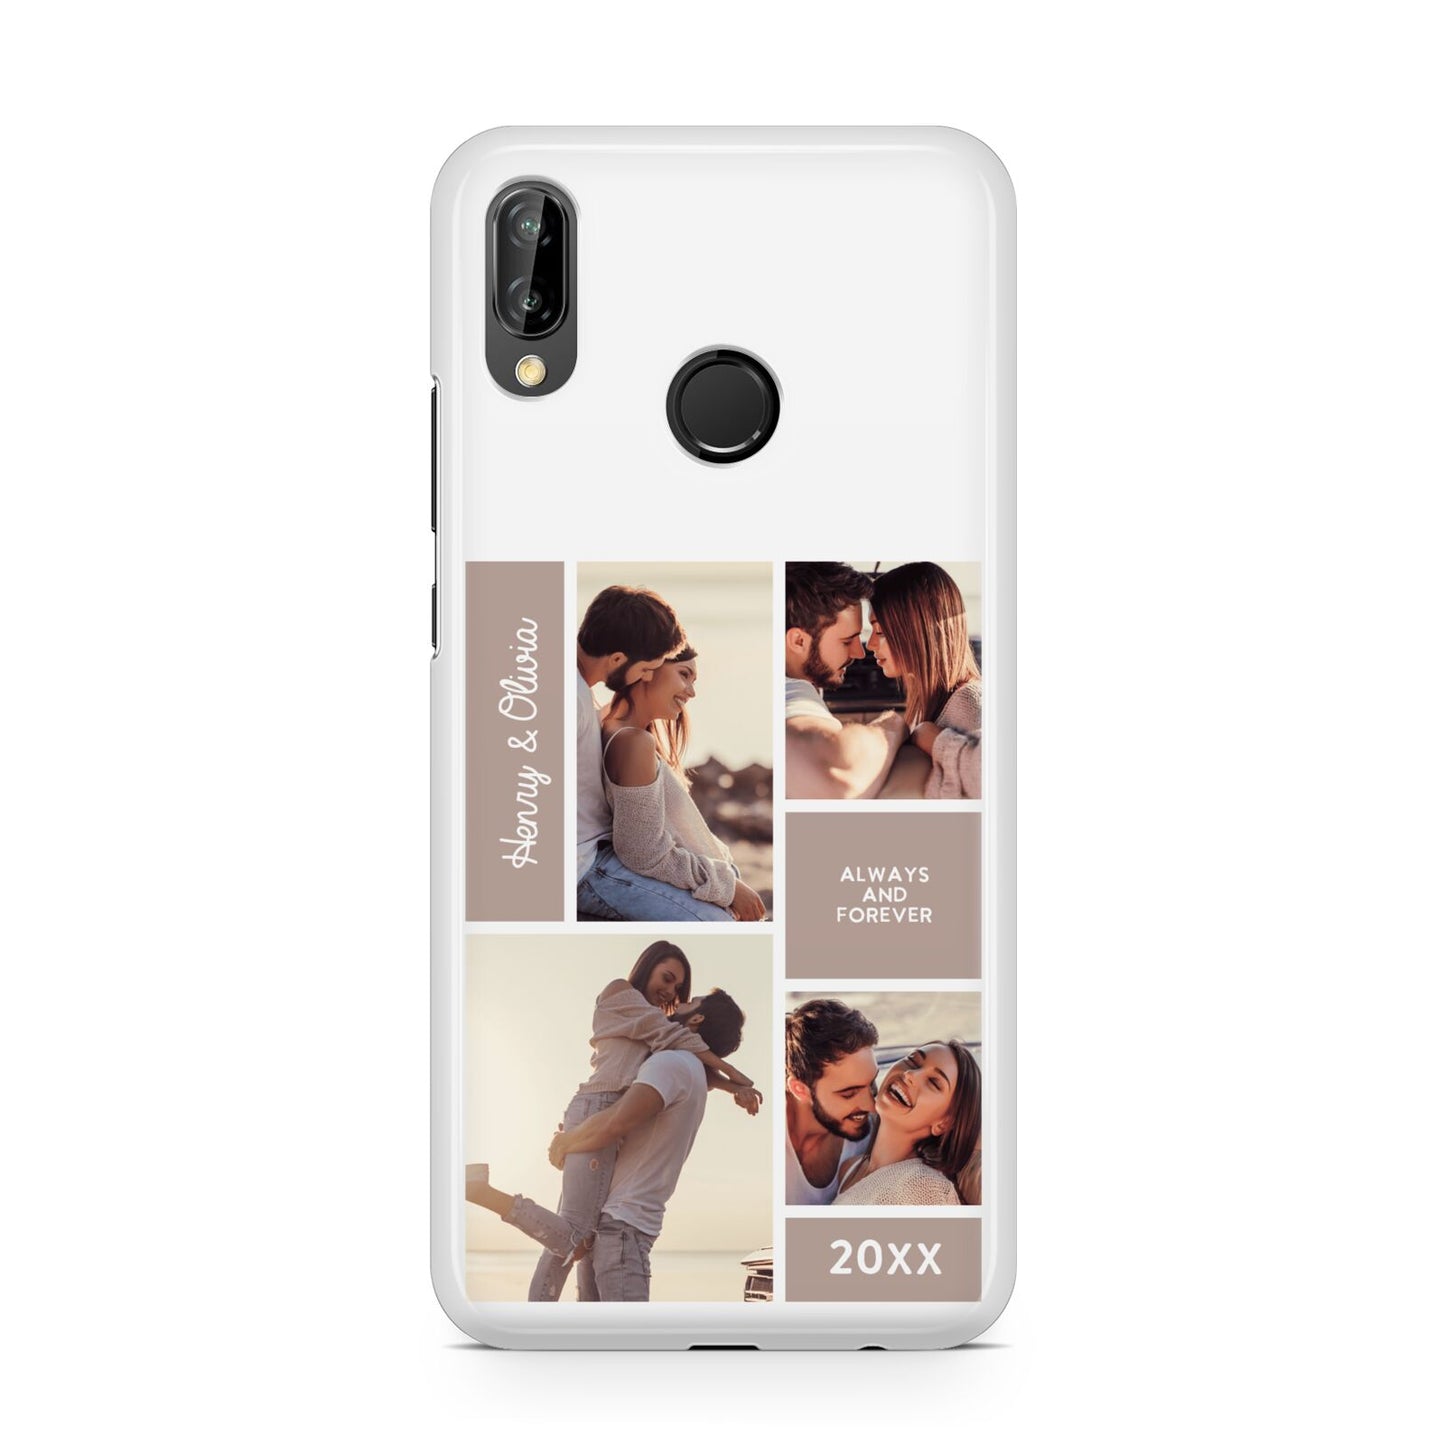 Couples Valentine Photo Collage Personalised Huawei P20 Lite Phone Case